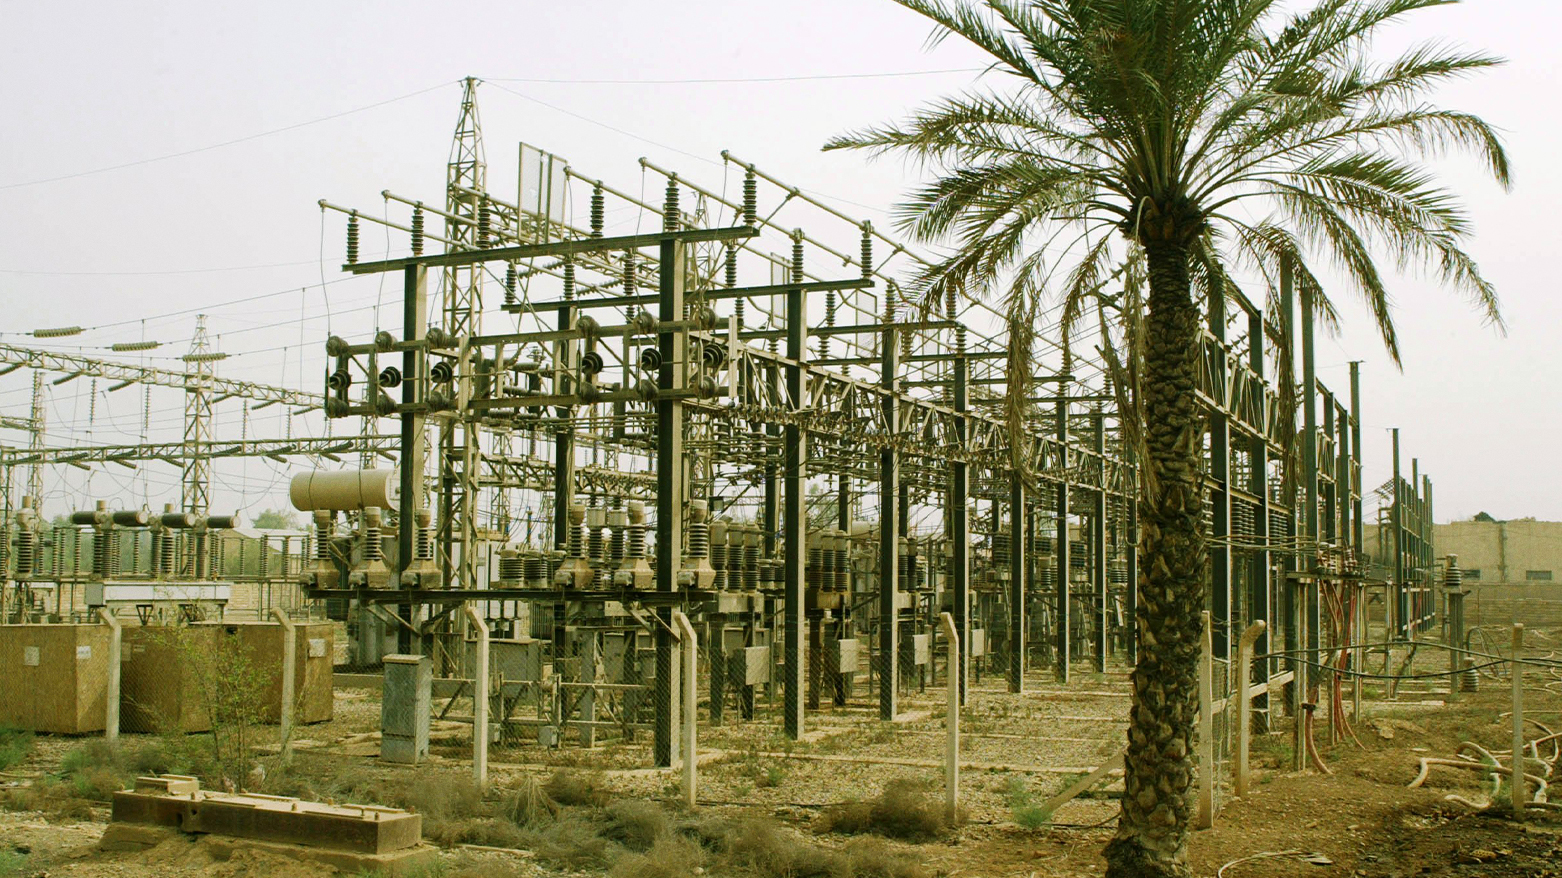 An electrical substation in Baghdad. (Photo: USAID)